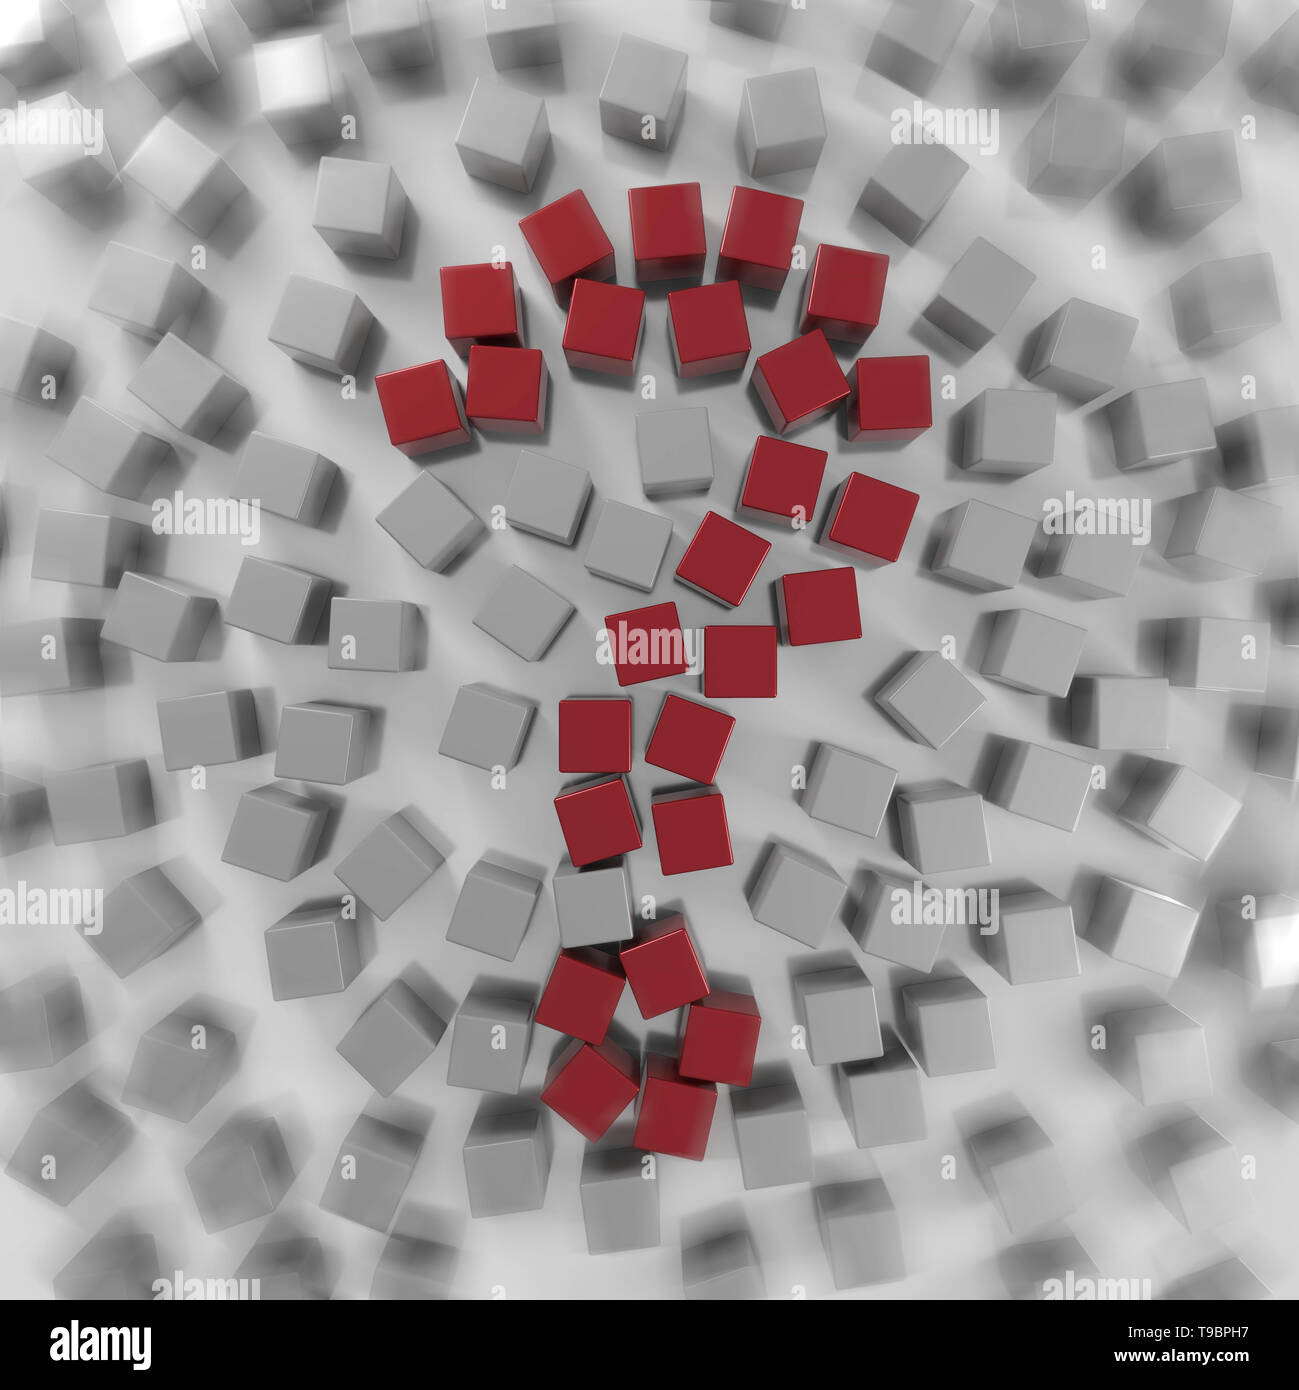 Red question mark made of cubes with radial blur Stock Photo